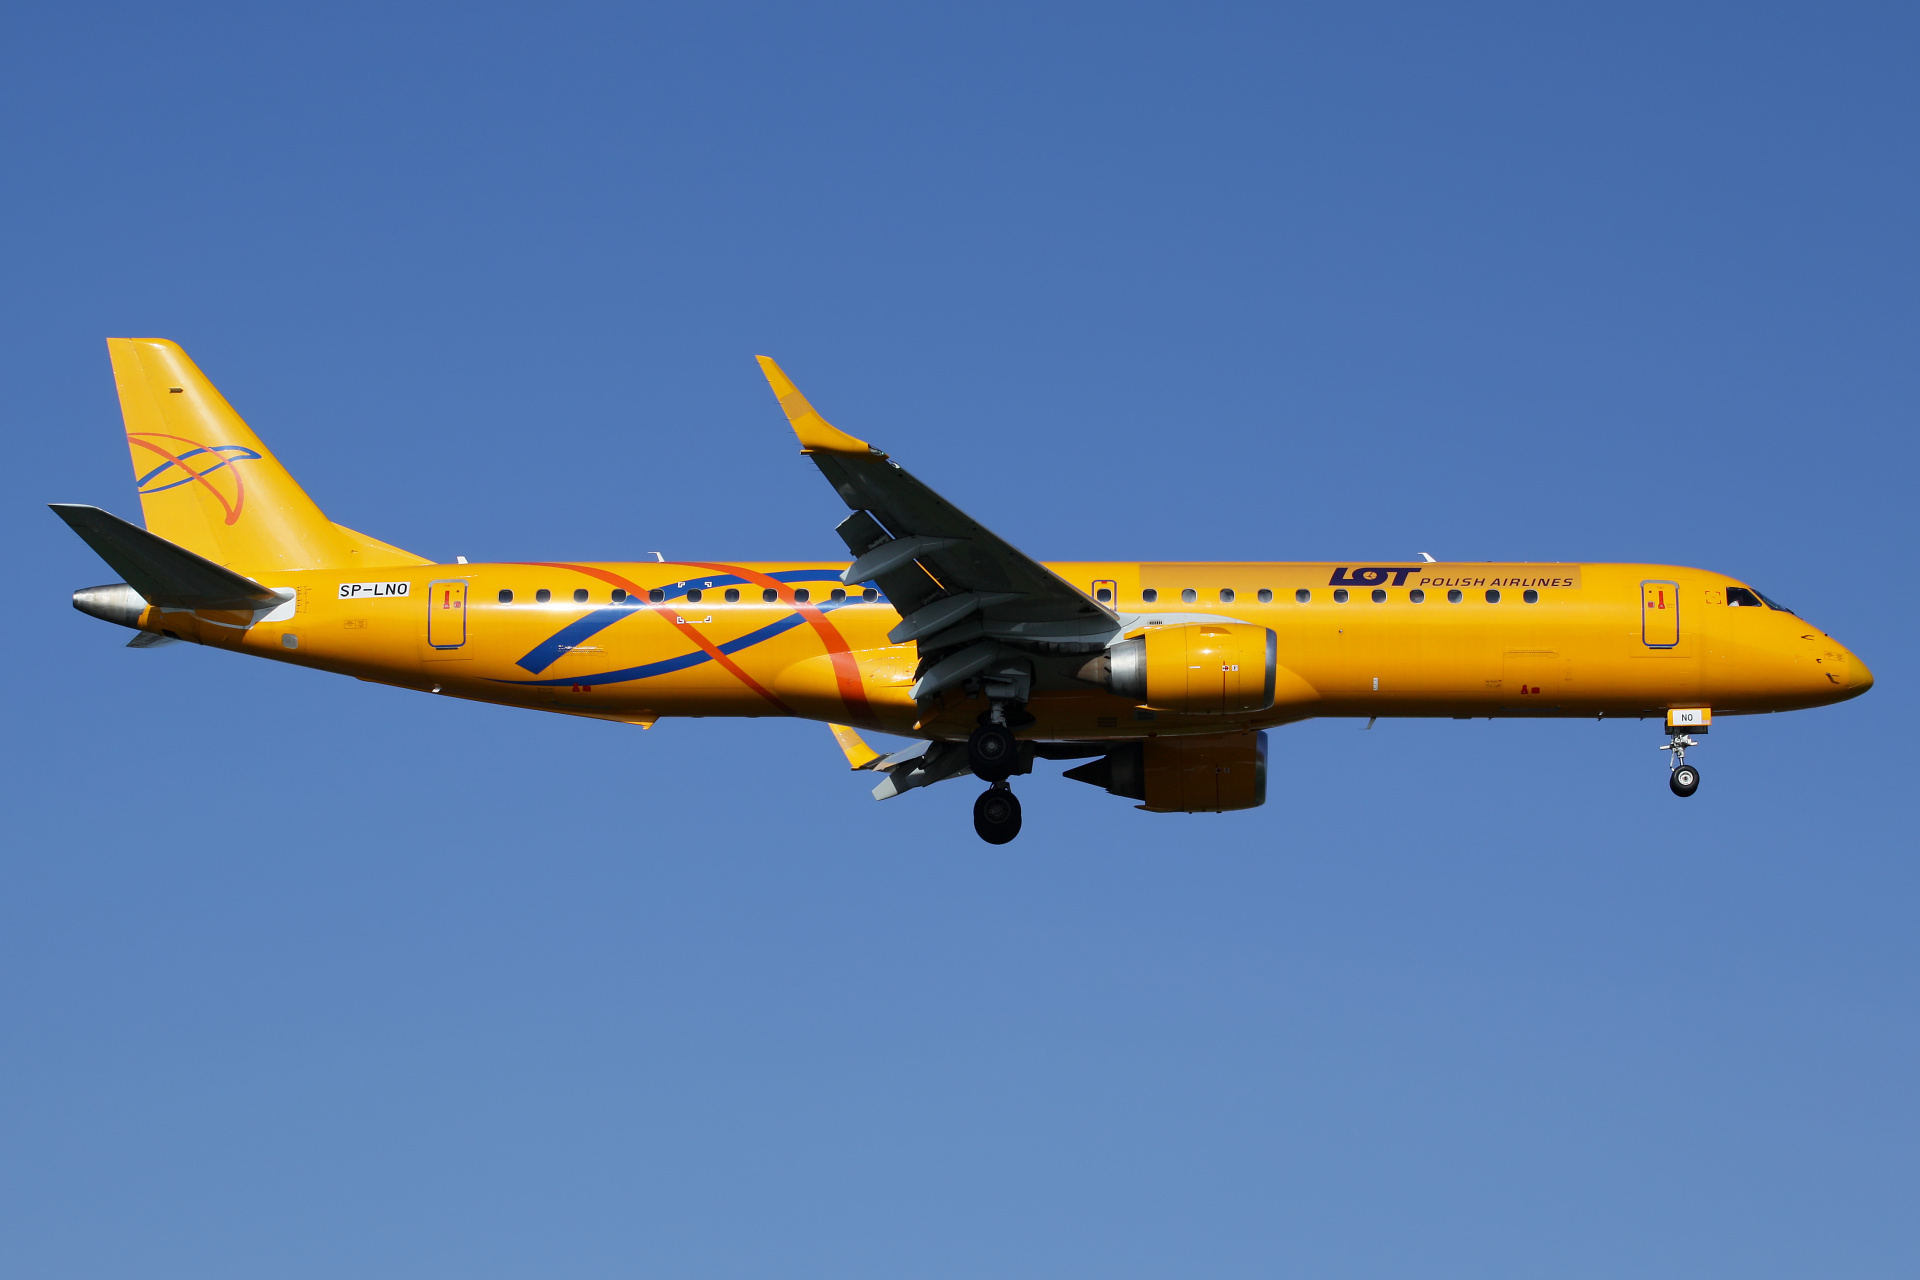 SP-LNO (Saratov Airlines) (Aircraft » EPWA Spotting » Embraer E195 » LOT Polish Airlines)